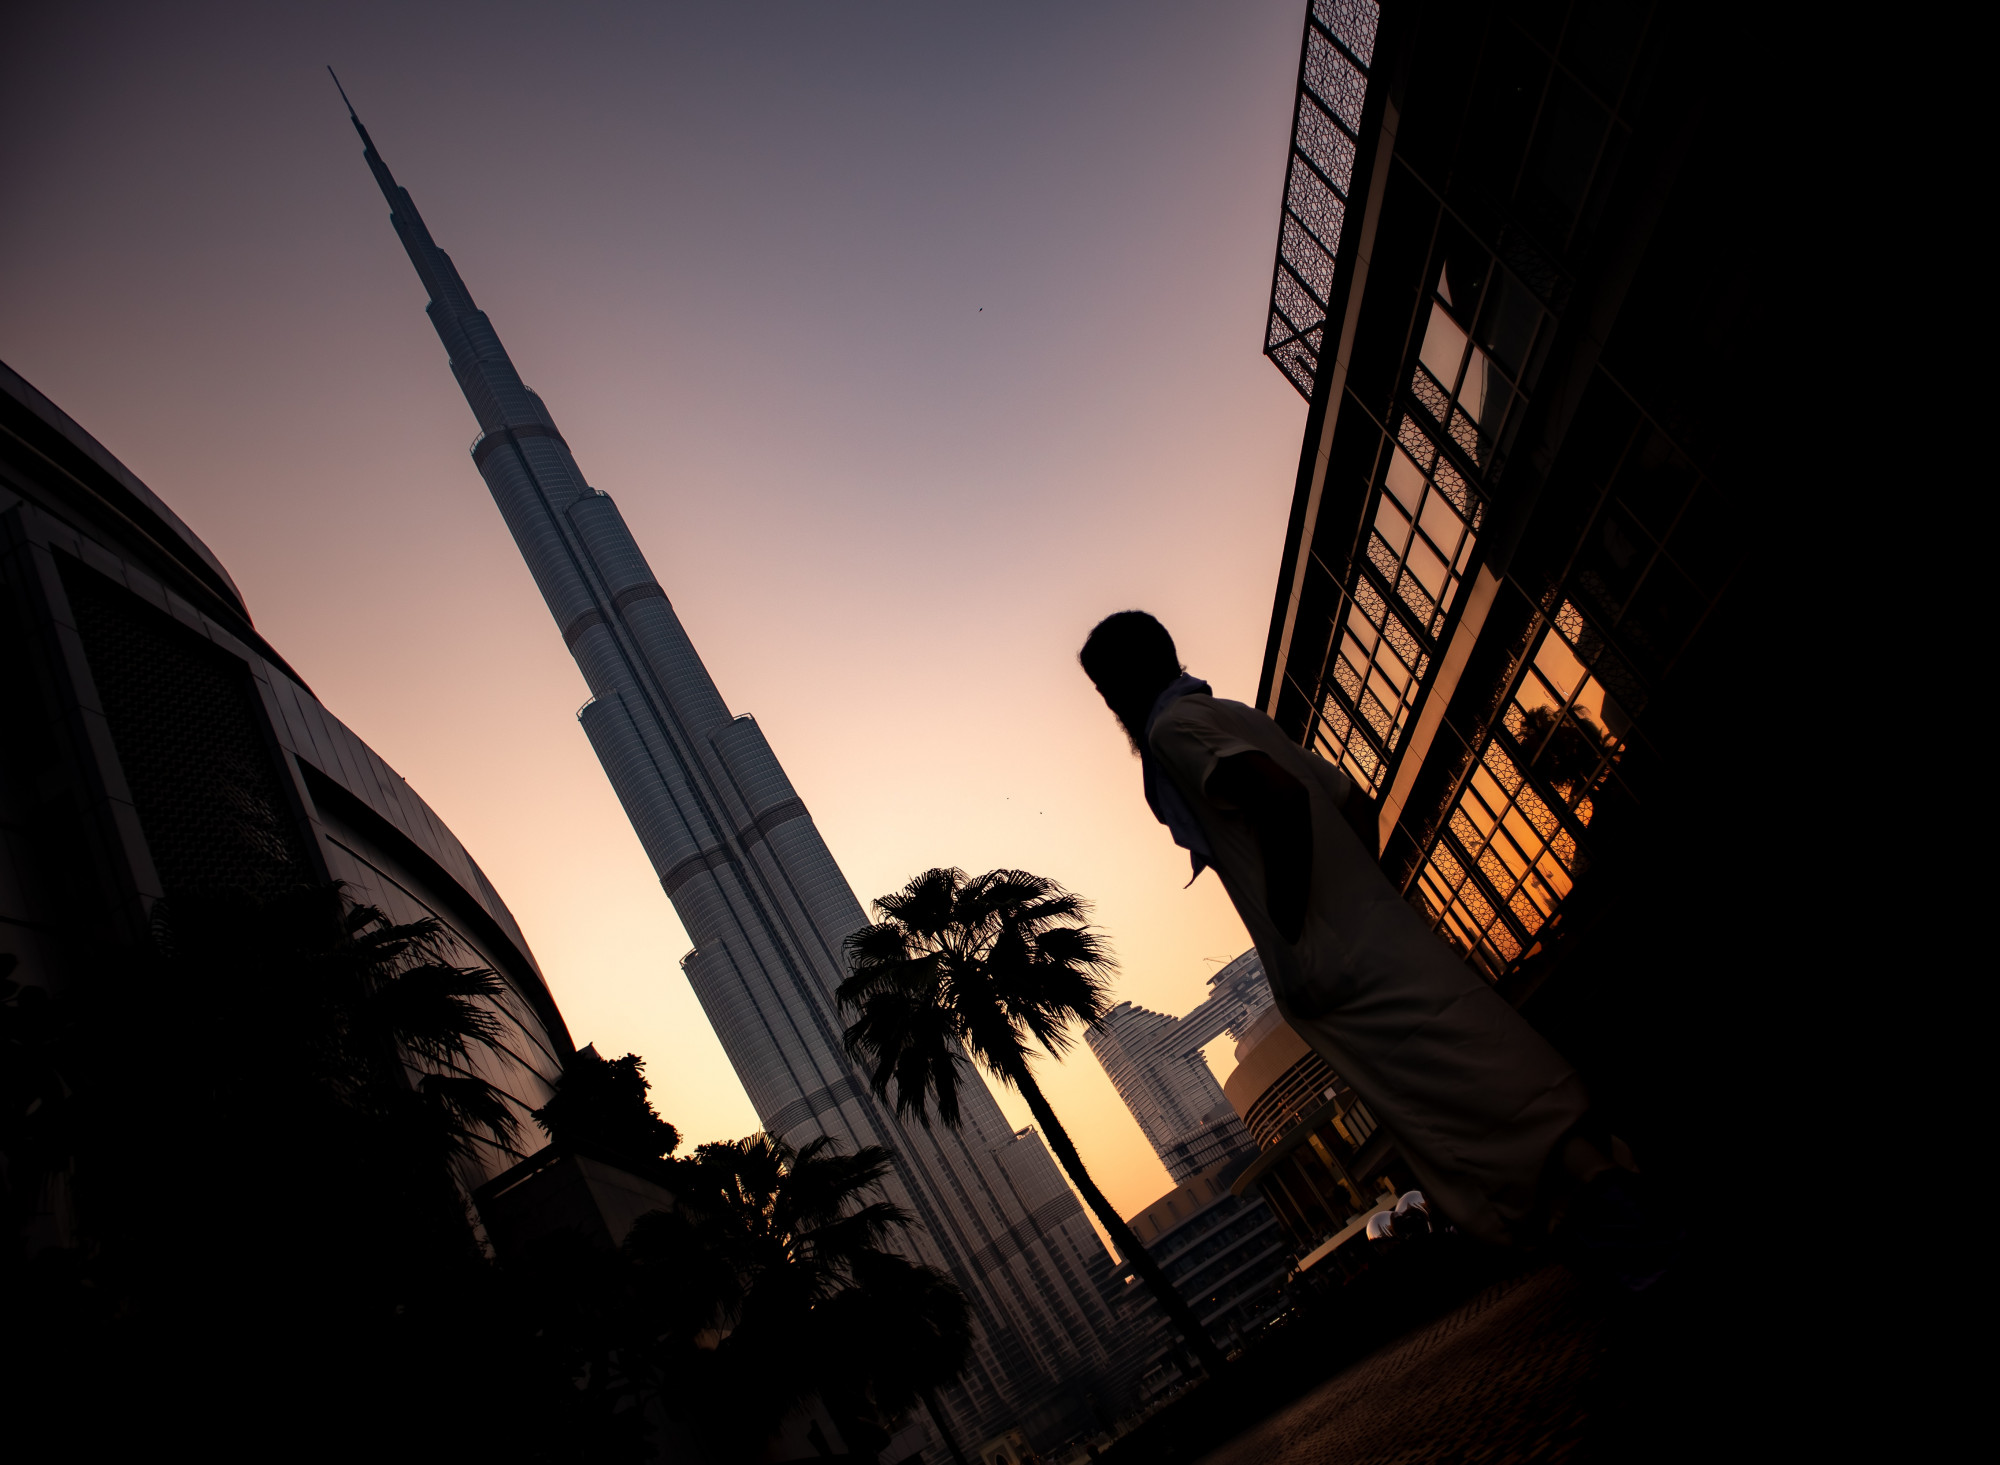 The silouette of a person set against the backdrop of a sunset Middle Eastern skyscraper.